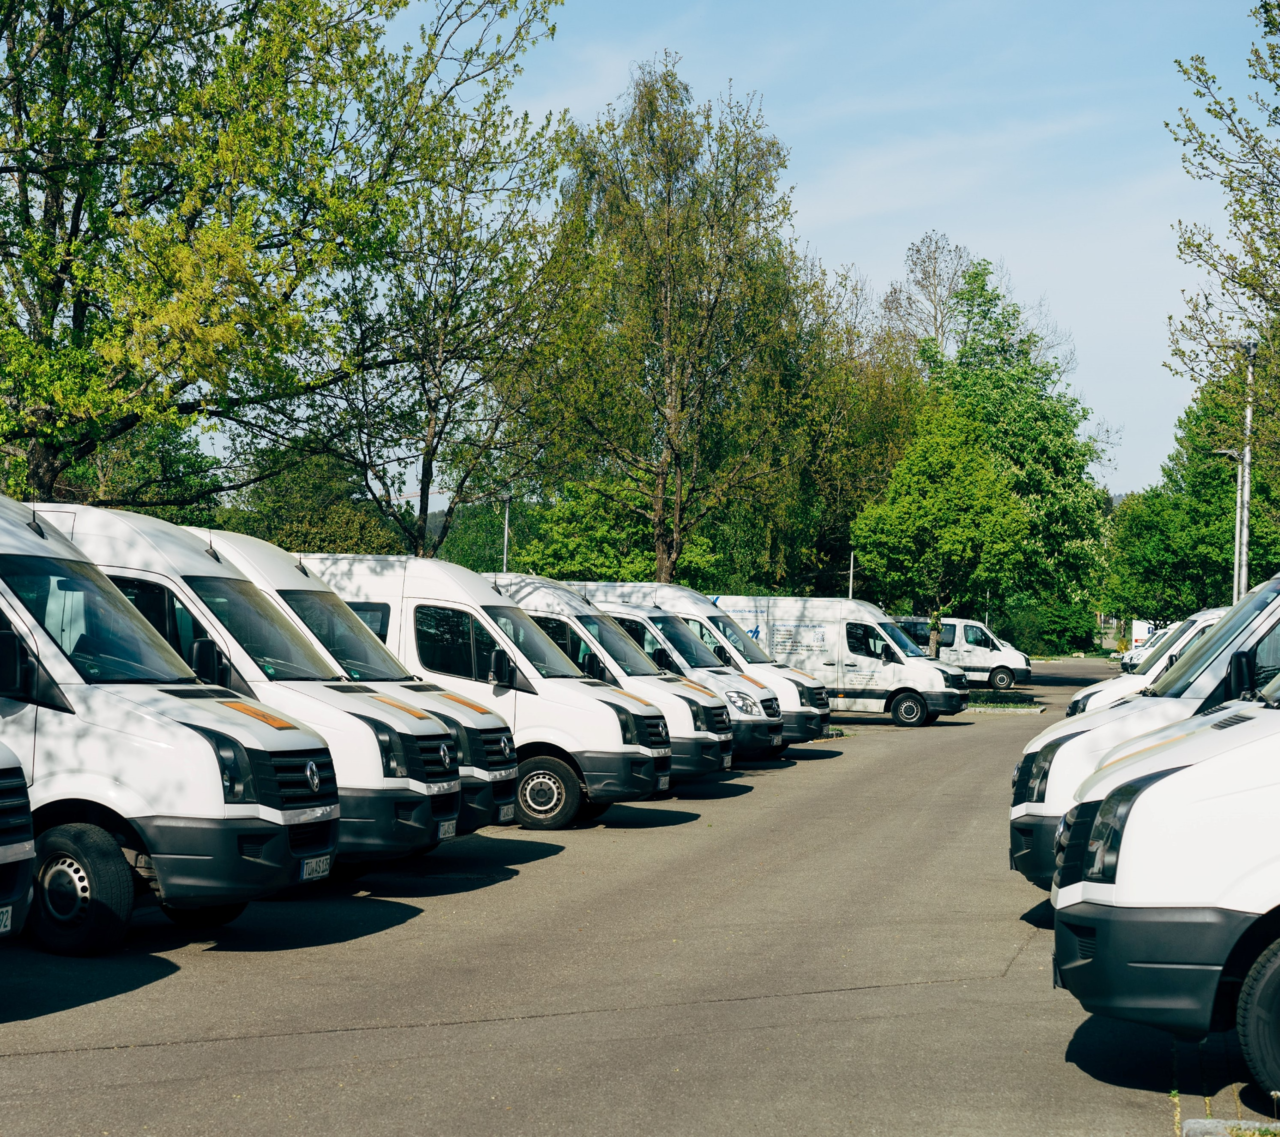 Rows of parked white vans